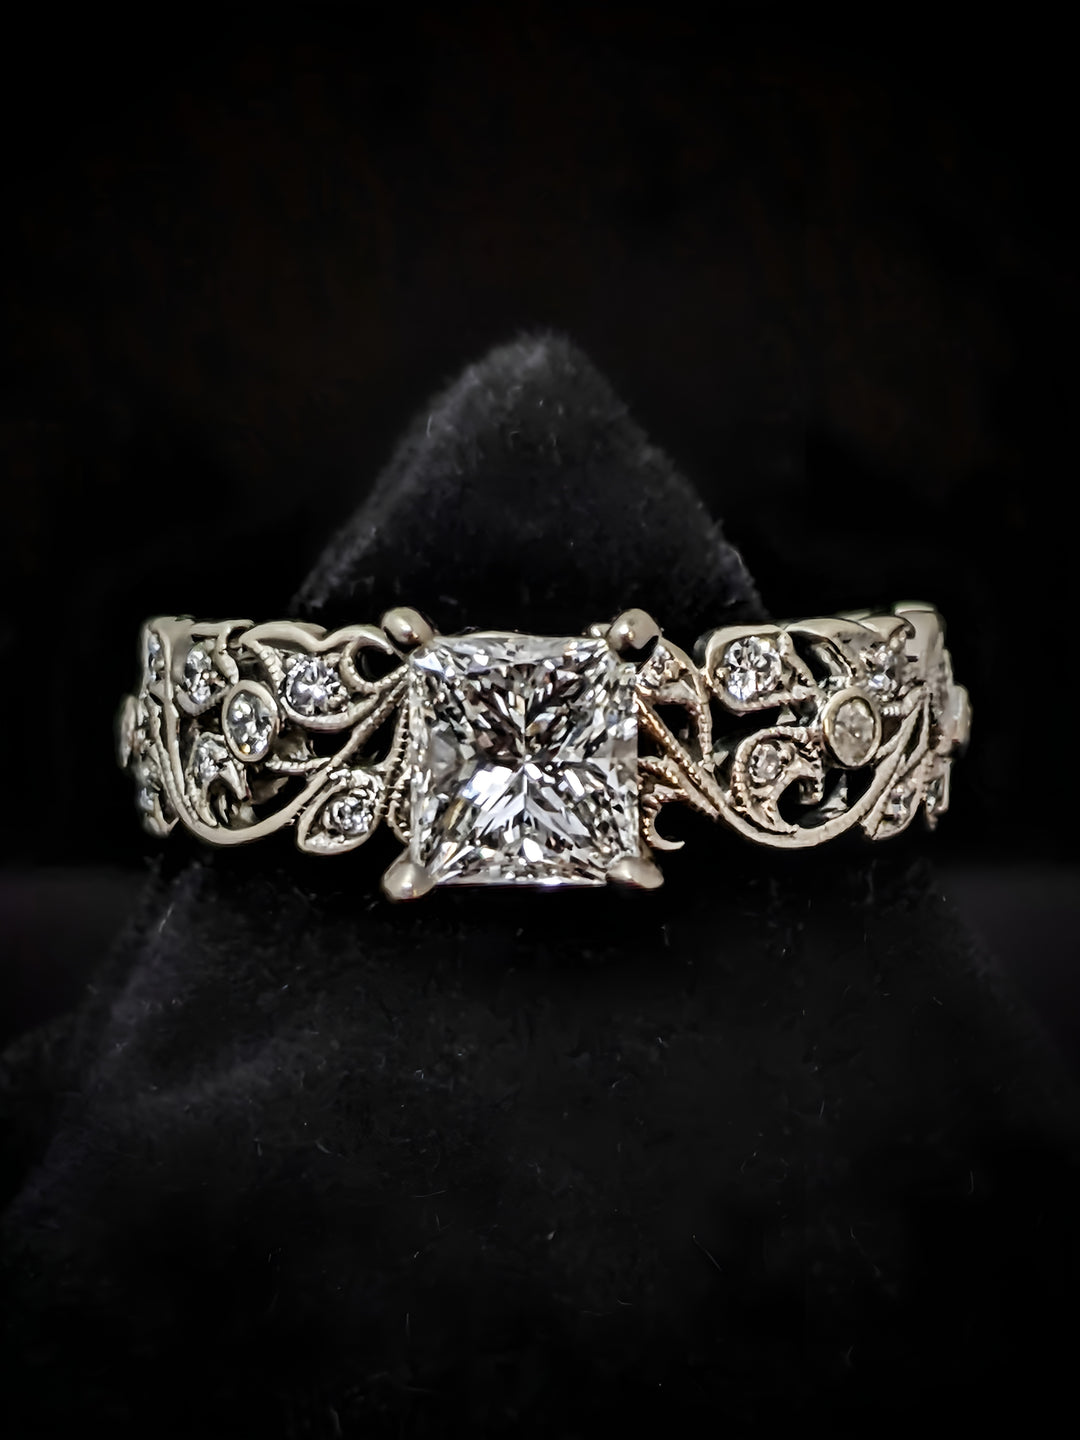 Princess Cut Diamond in White Gold Floral Engagement Ring